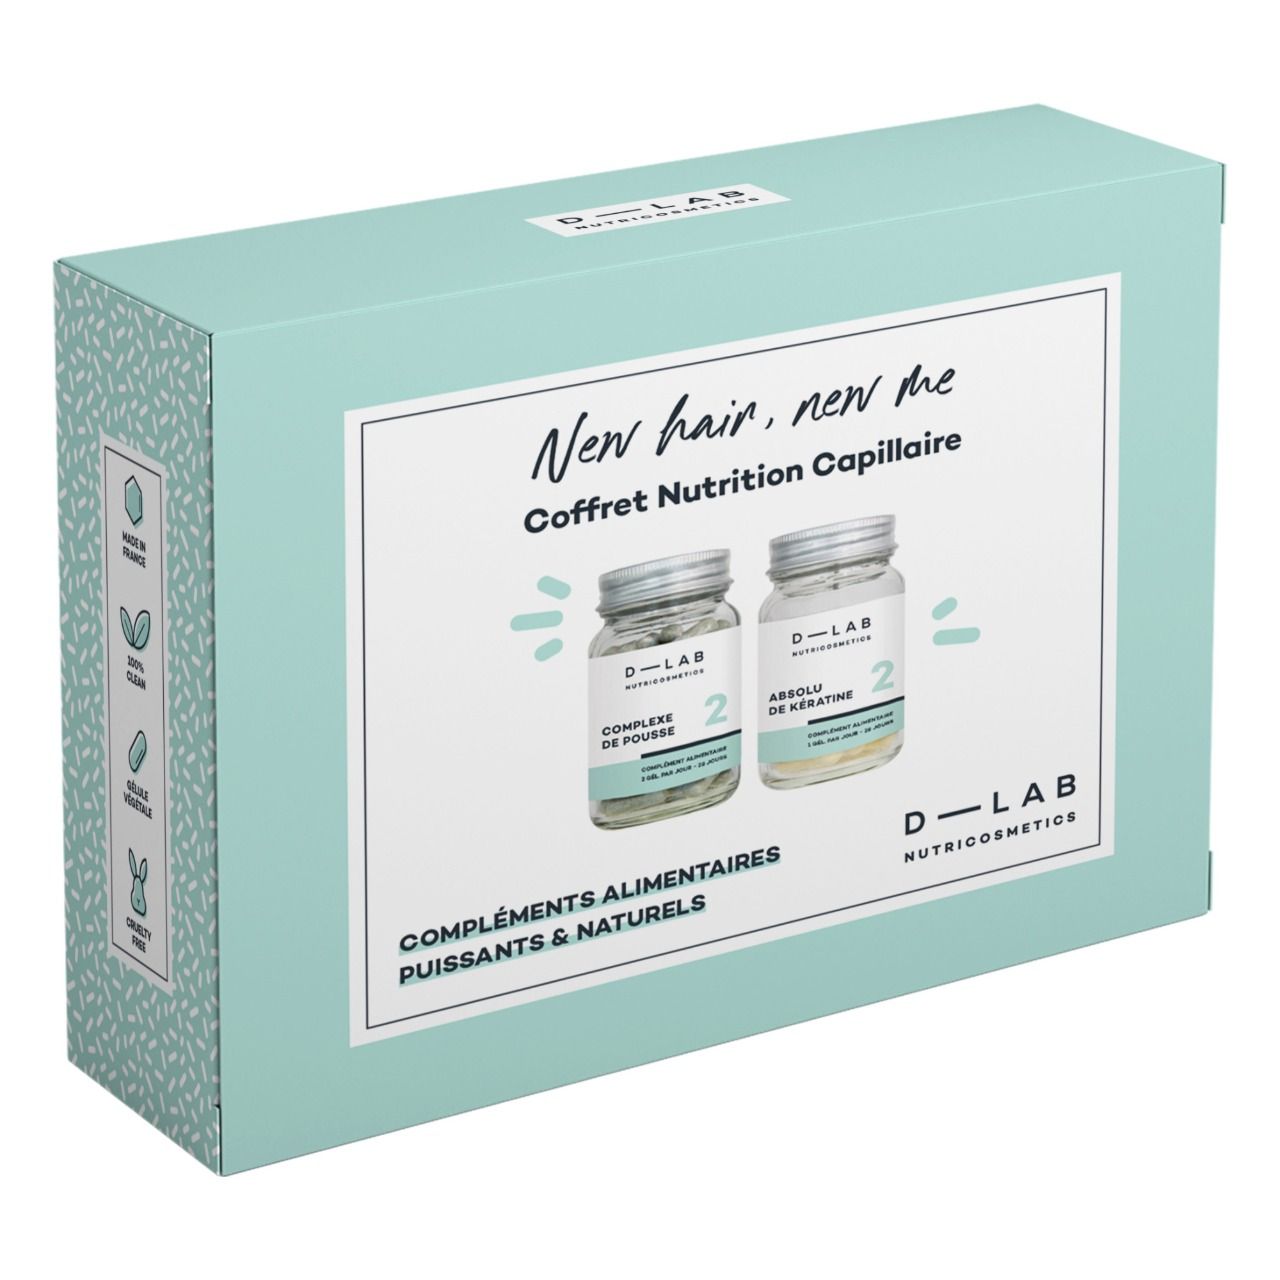 COFFRET NUTRITION CAPILLAIRE New hair, new me - DLAB Nutricosmetics